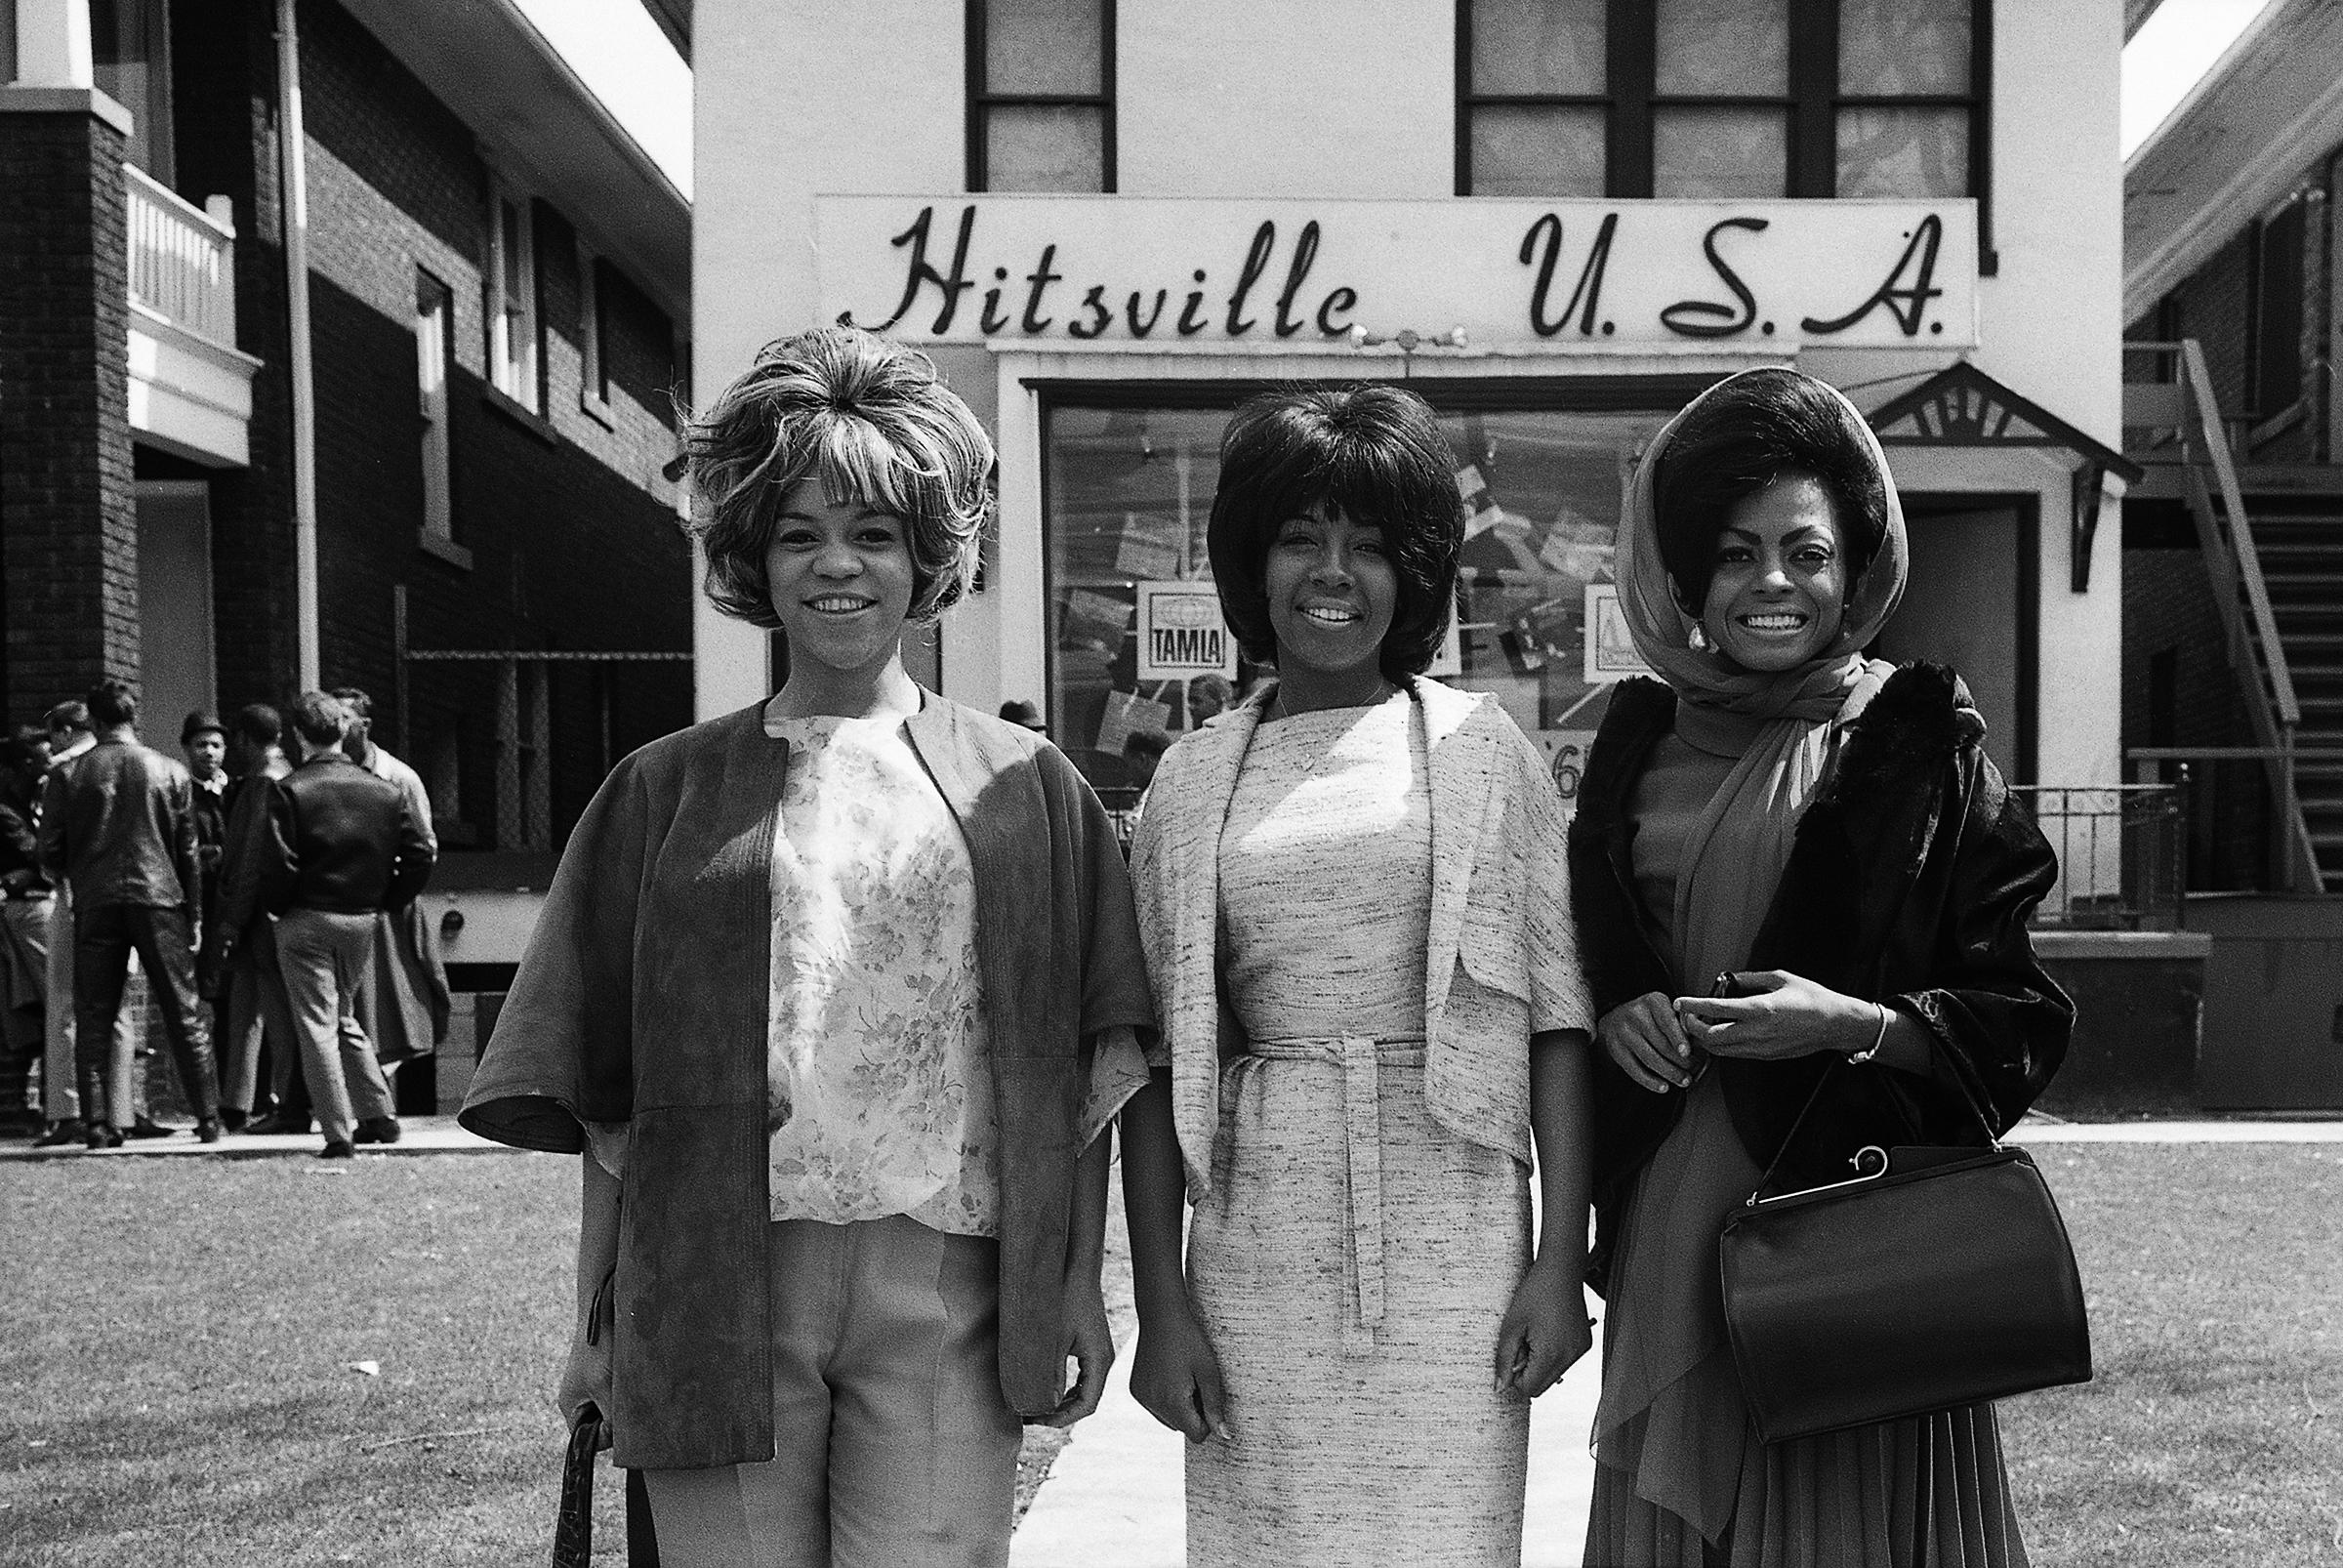 Art Shay Black and White Photograph - The Supremes at Hitsville U.S.A., Detroit 1965, Framed, Signed Photograph